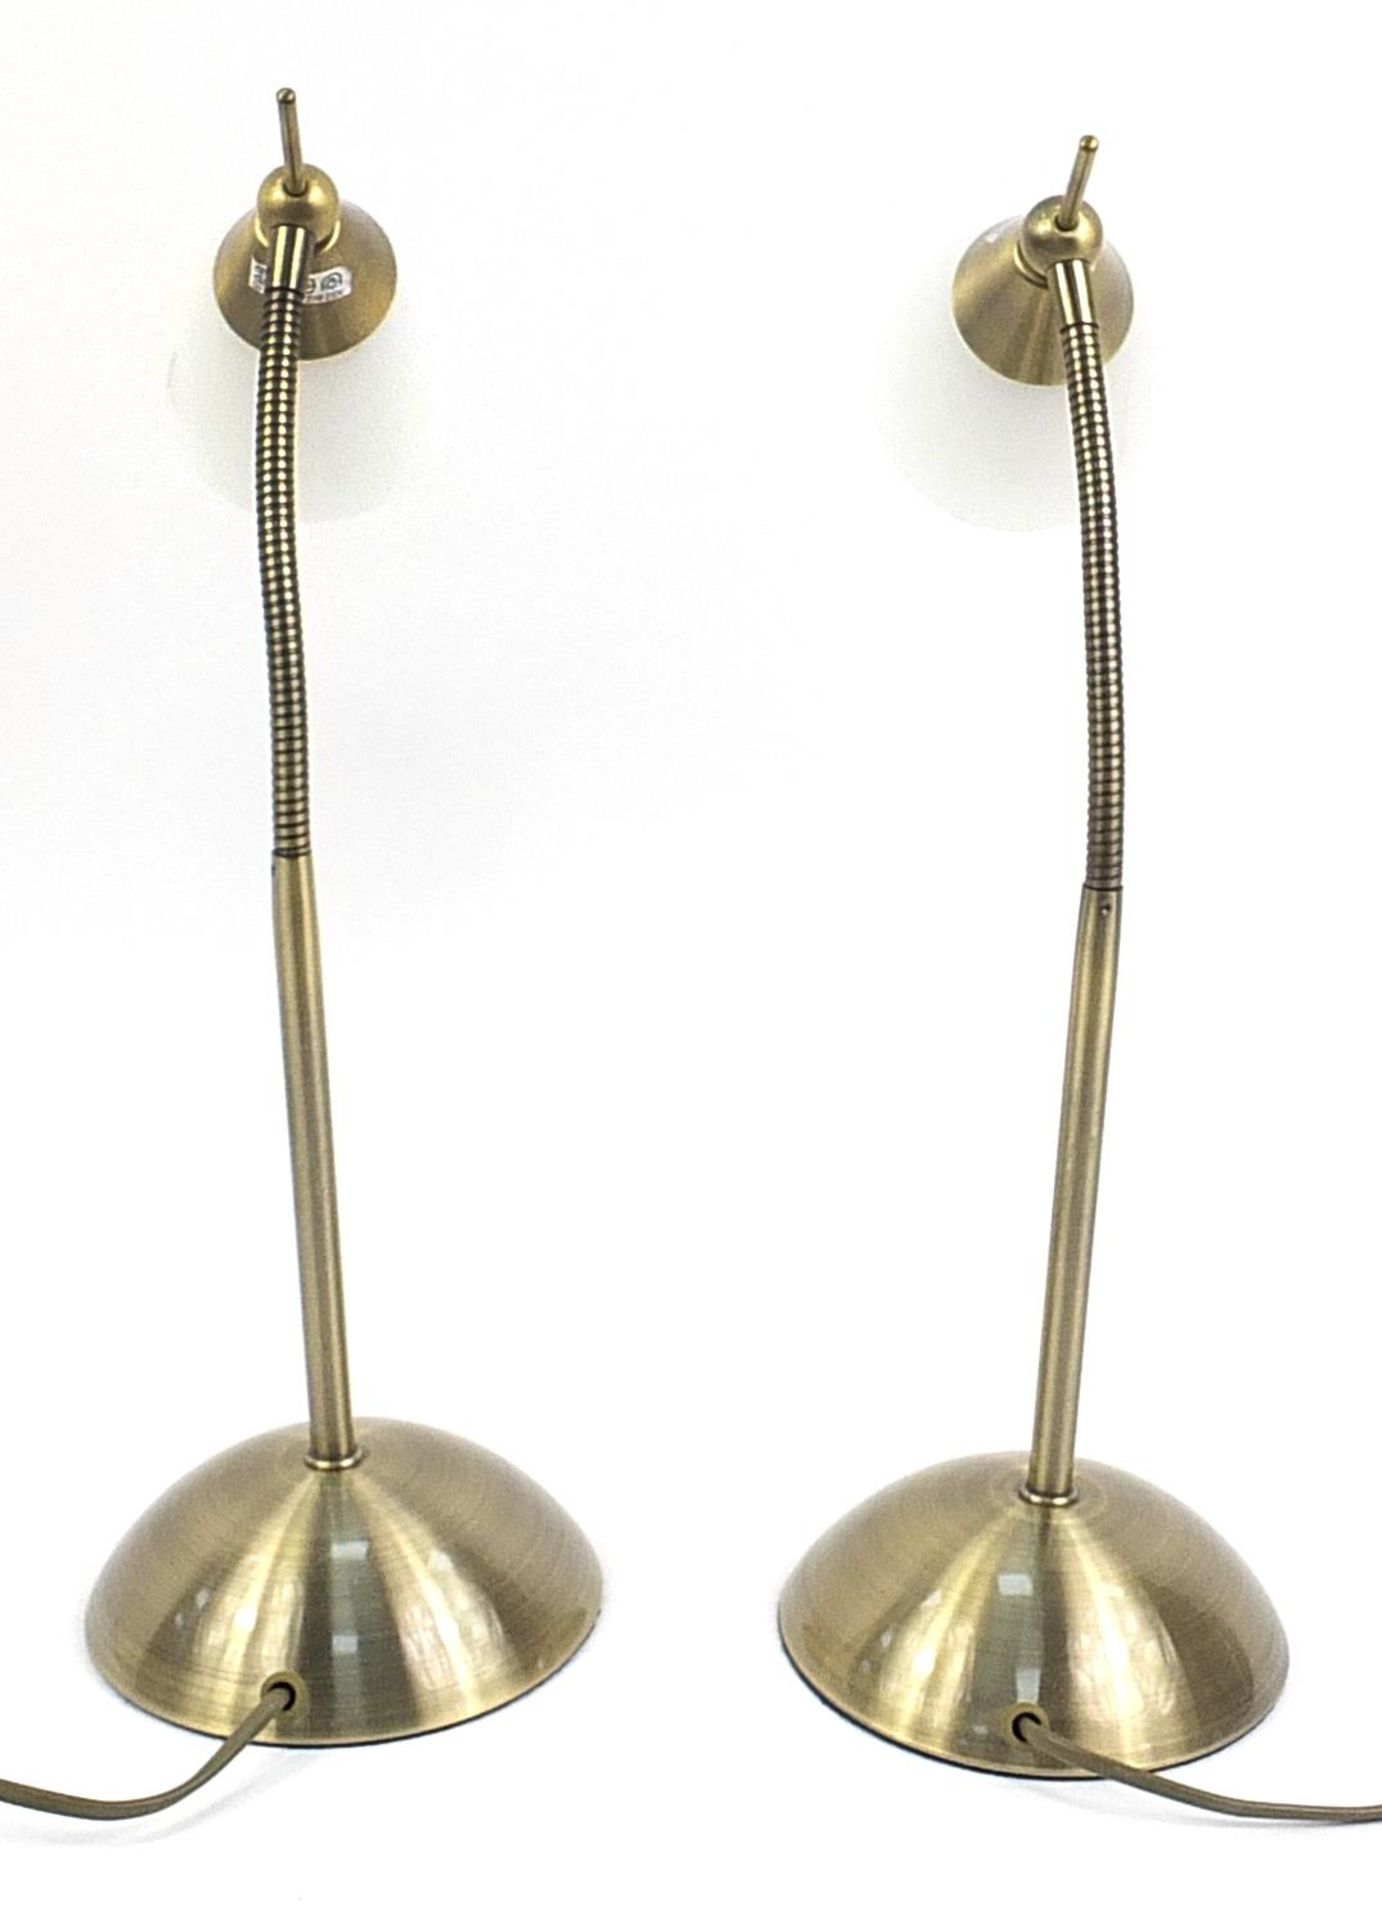 Pair of gilt metal student Anglepoise lamps with white glass shades, 43cm high - Image 2 of 2